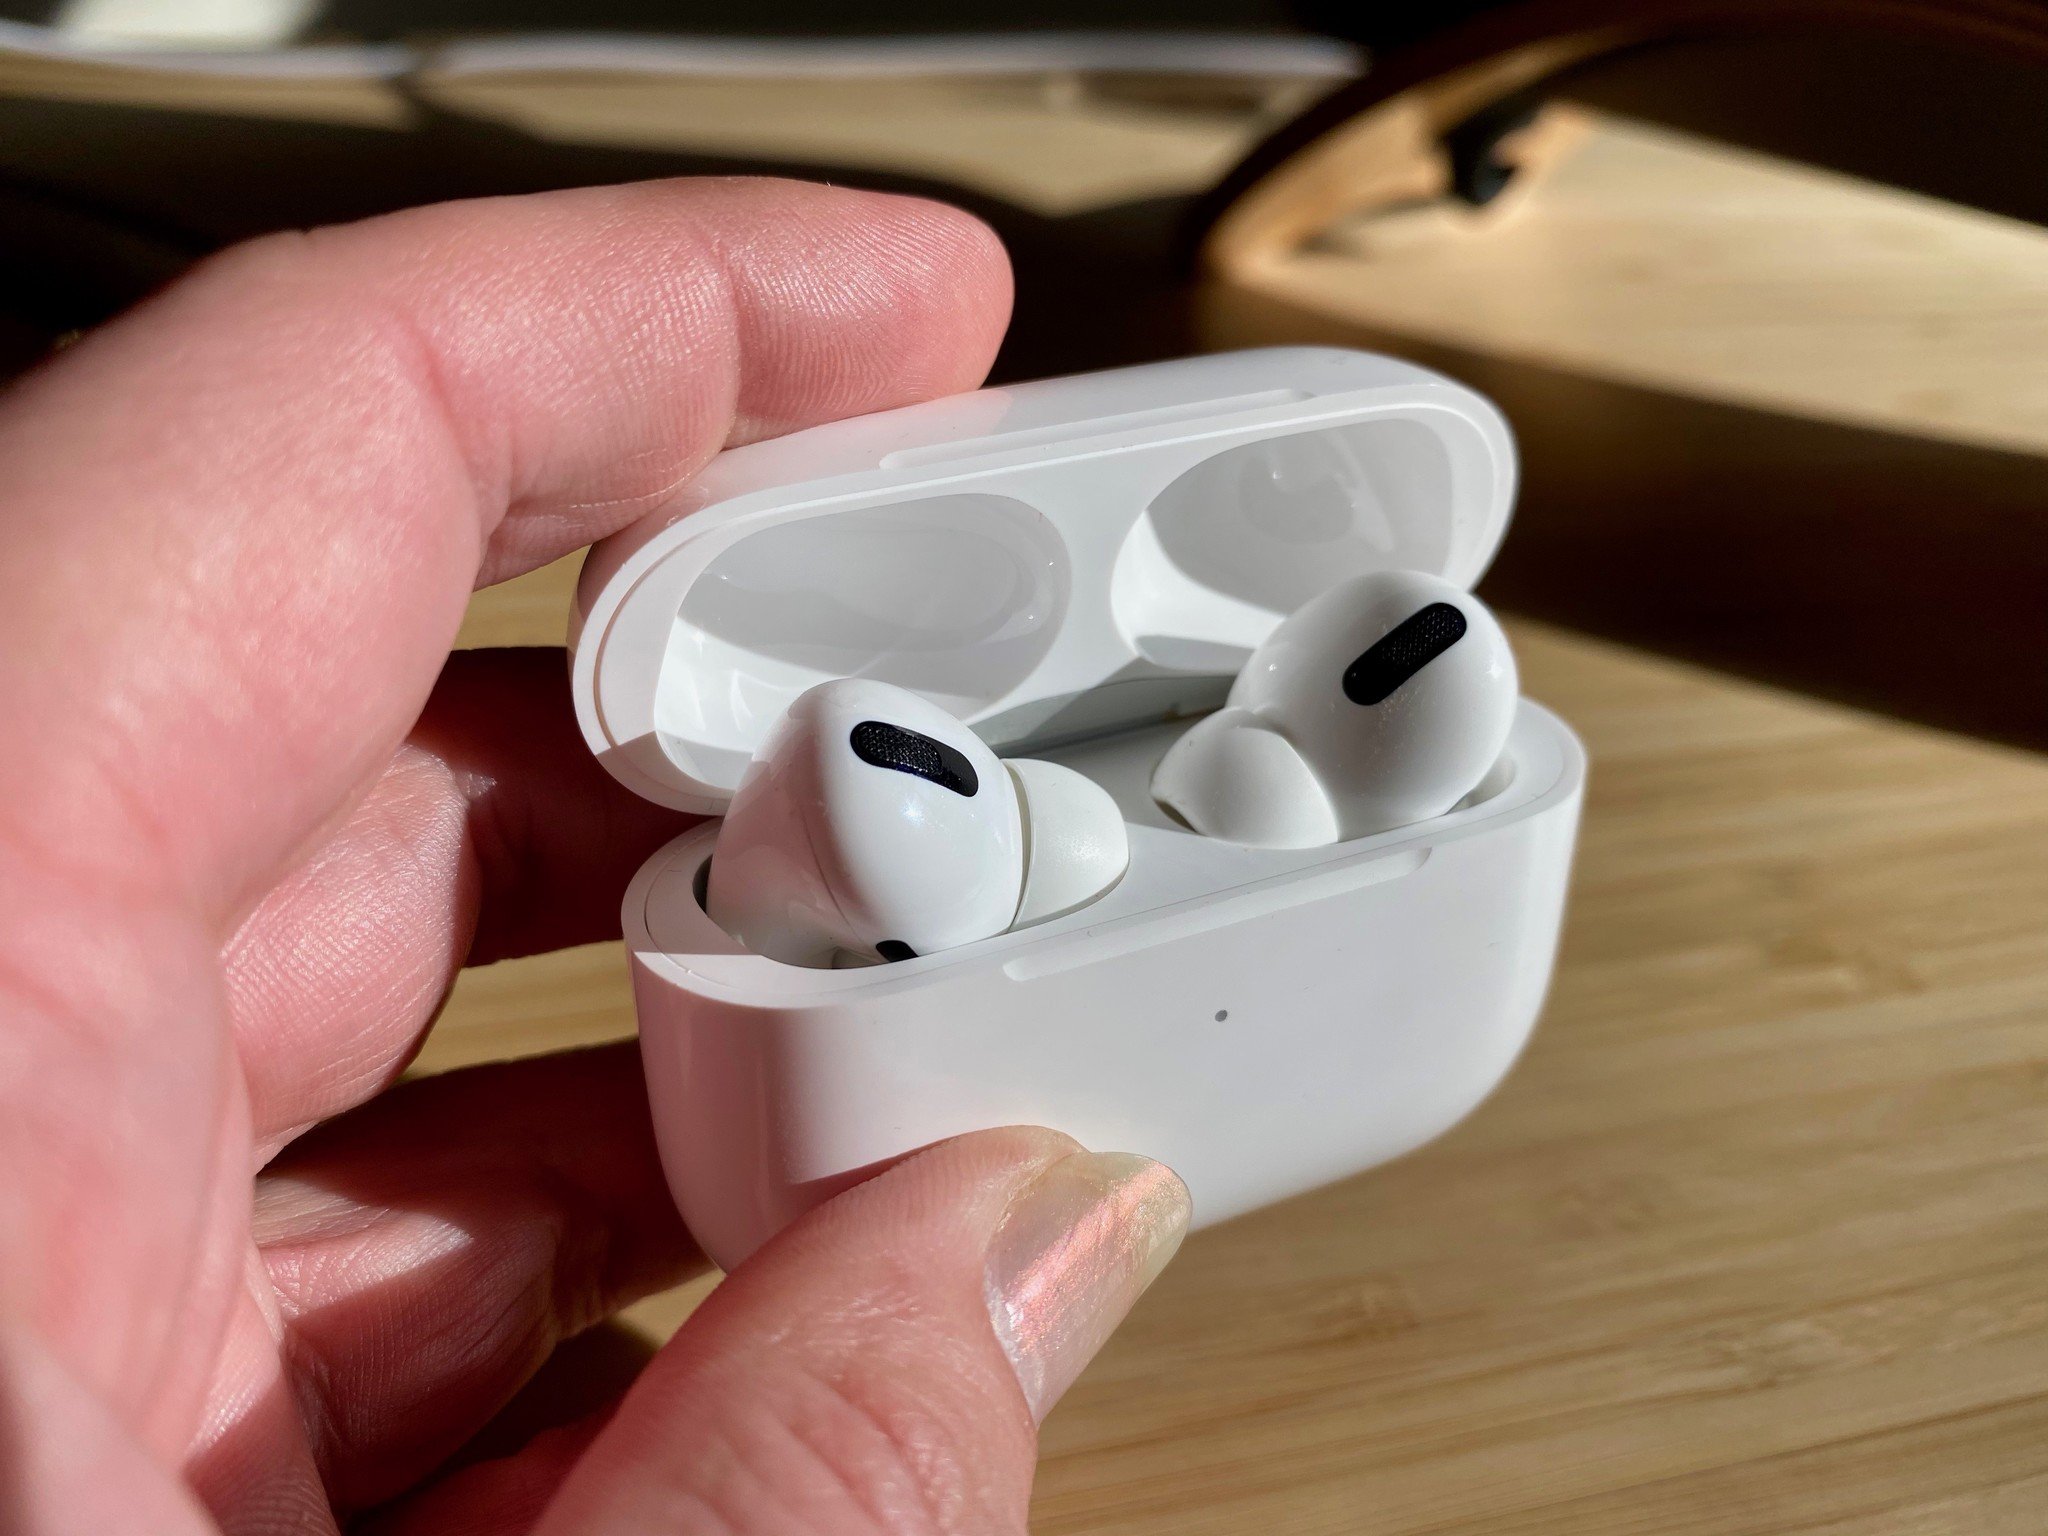 Apple's new AirPods will look like AirPods Pro, but without Active